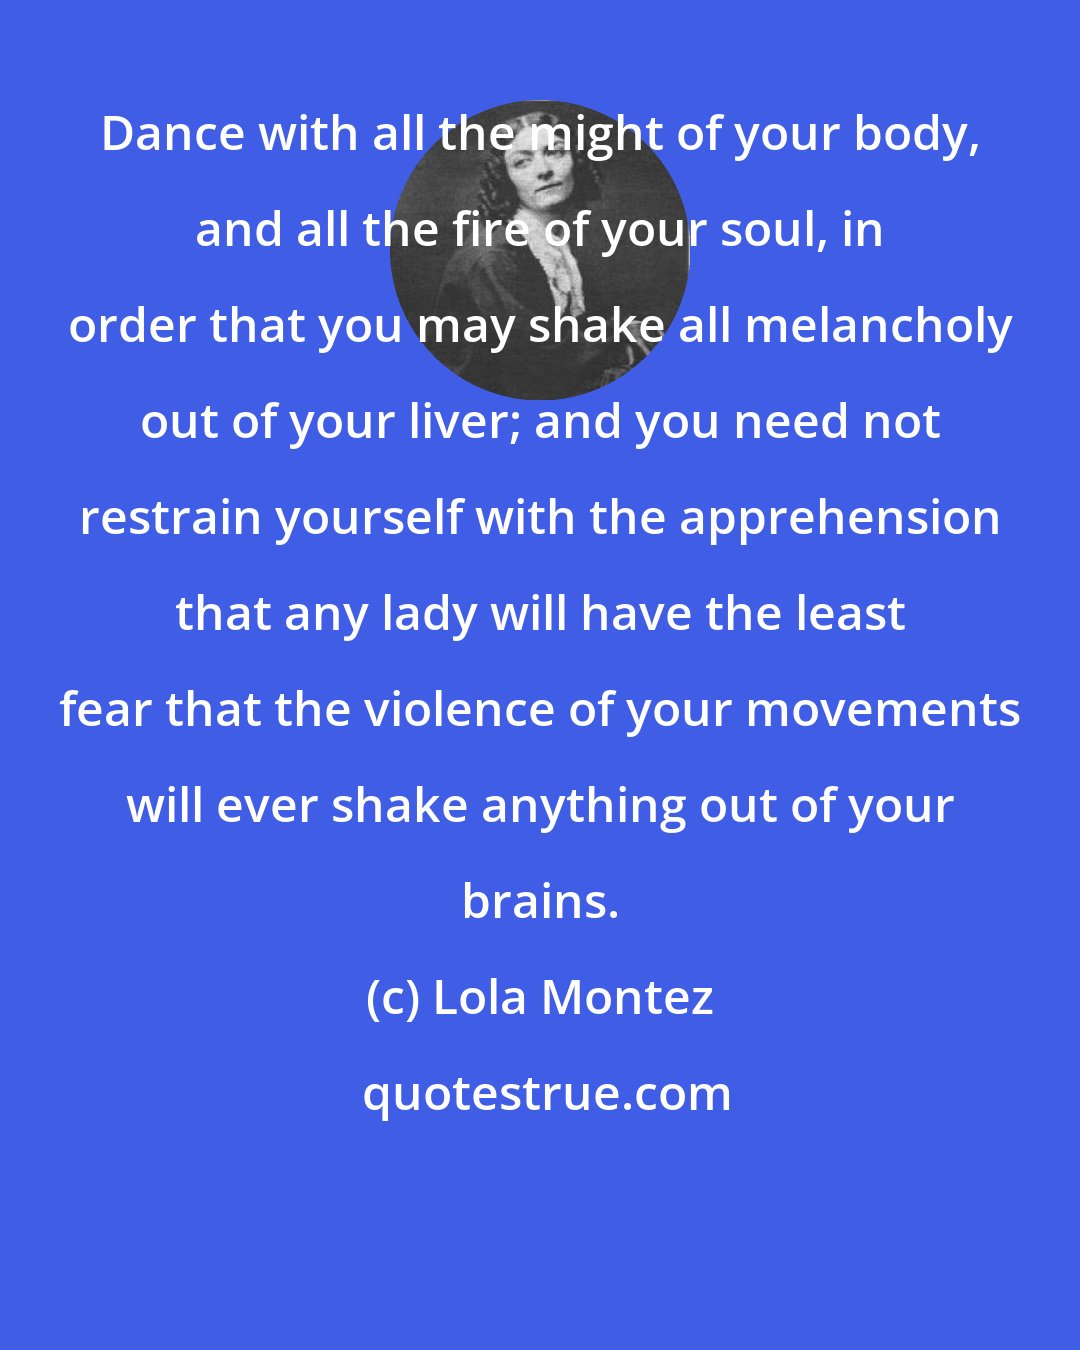 Lola Montez: Dance with all the might of your body, and all the fire of your soul, in order that you may shake all melancholy out of your liver; and you need not restrain yourself with the apprehension that any lady will have the least fear that the violence of your movements will ever shake anything out of your brains.